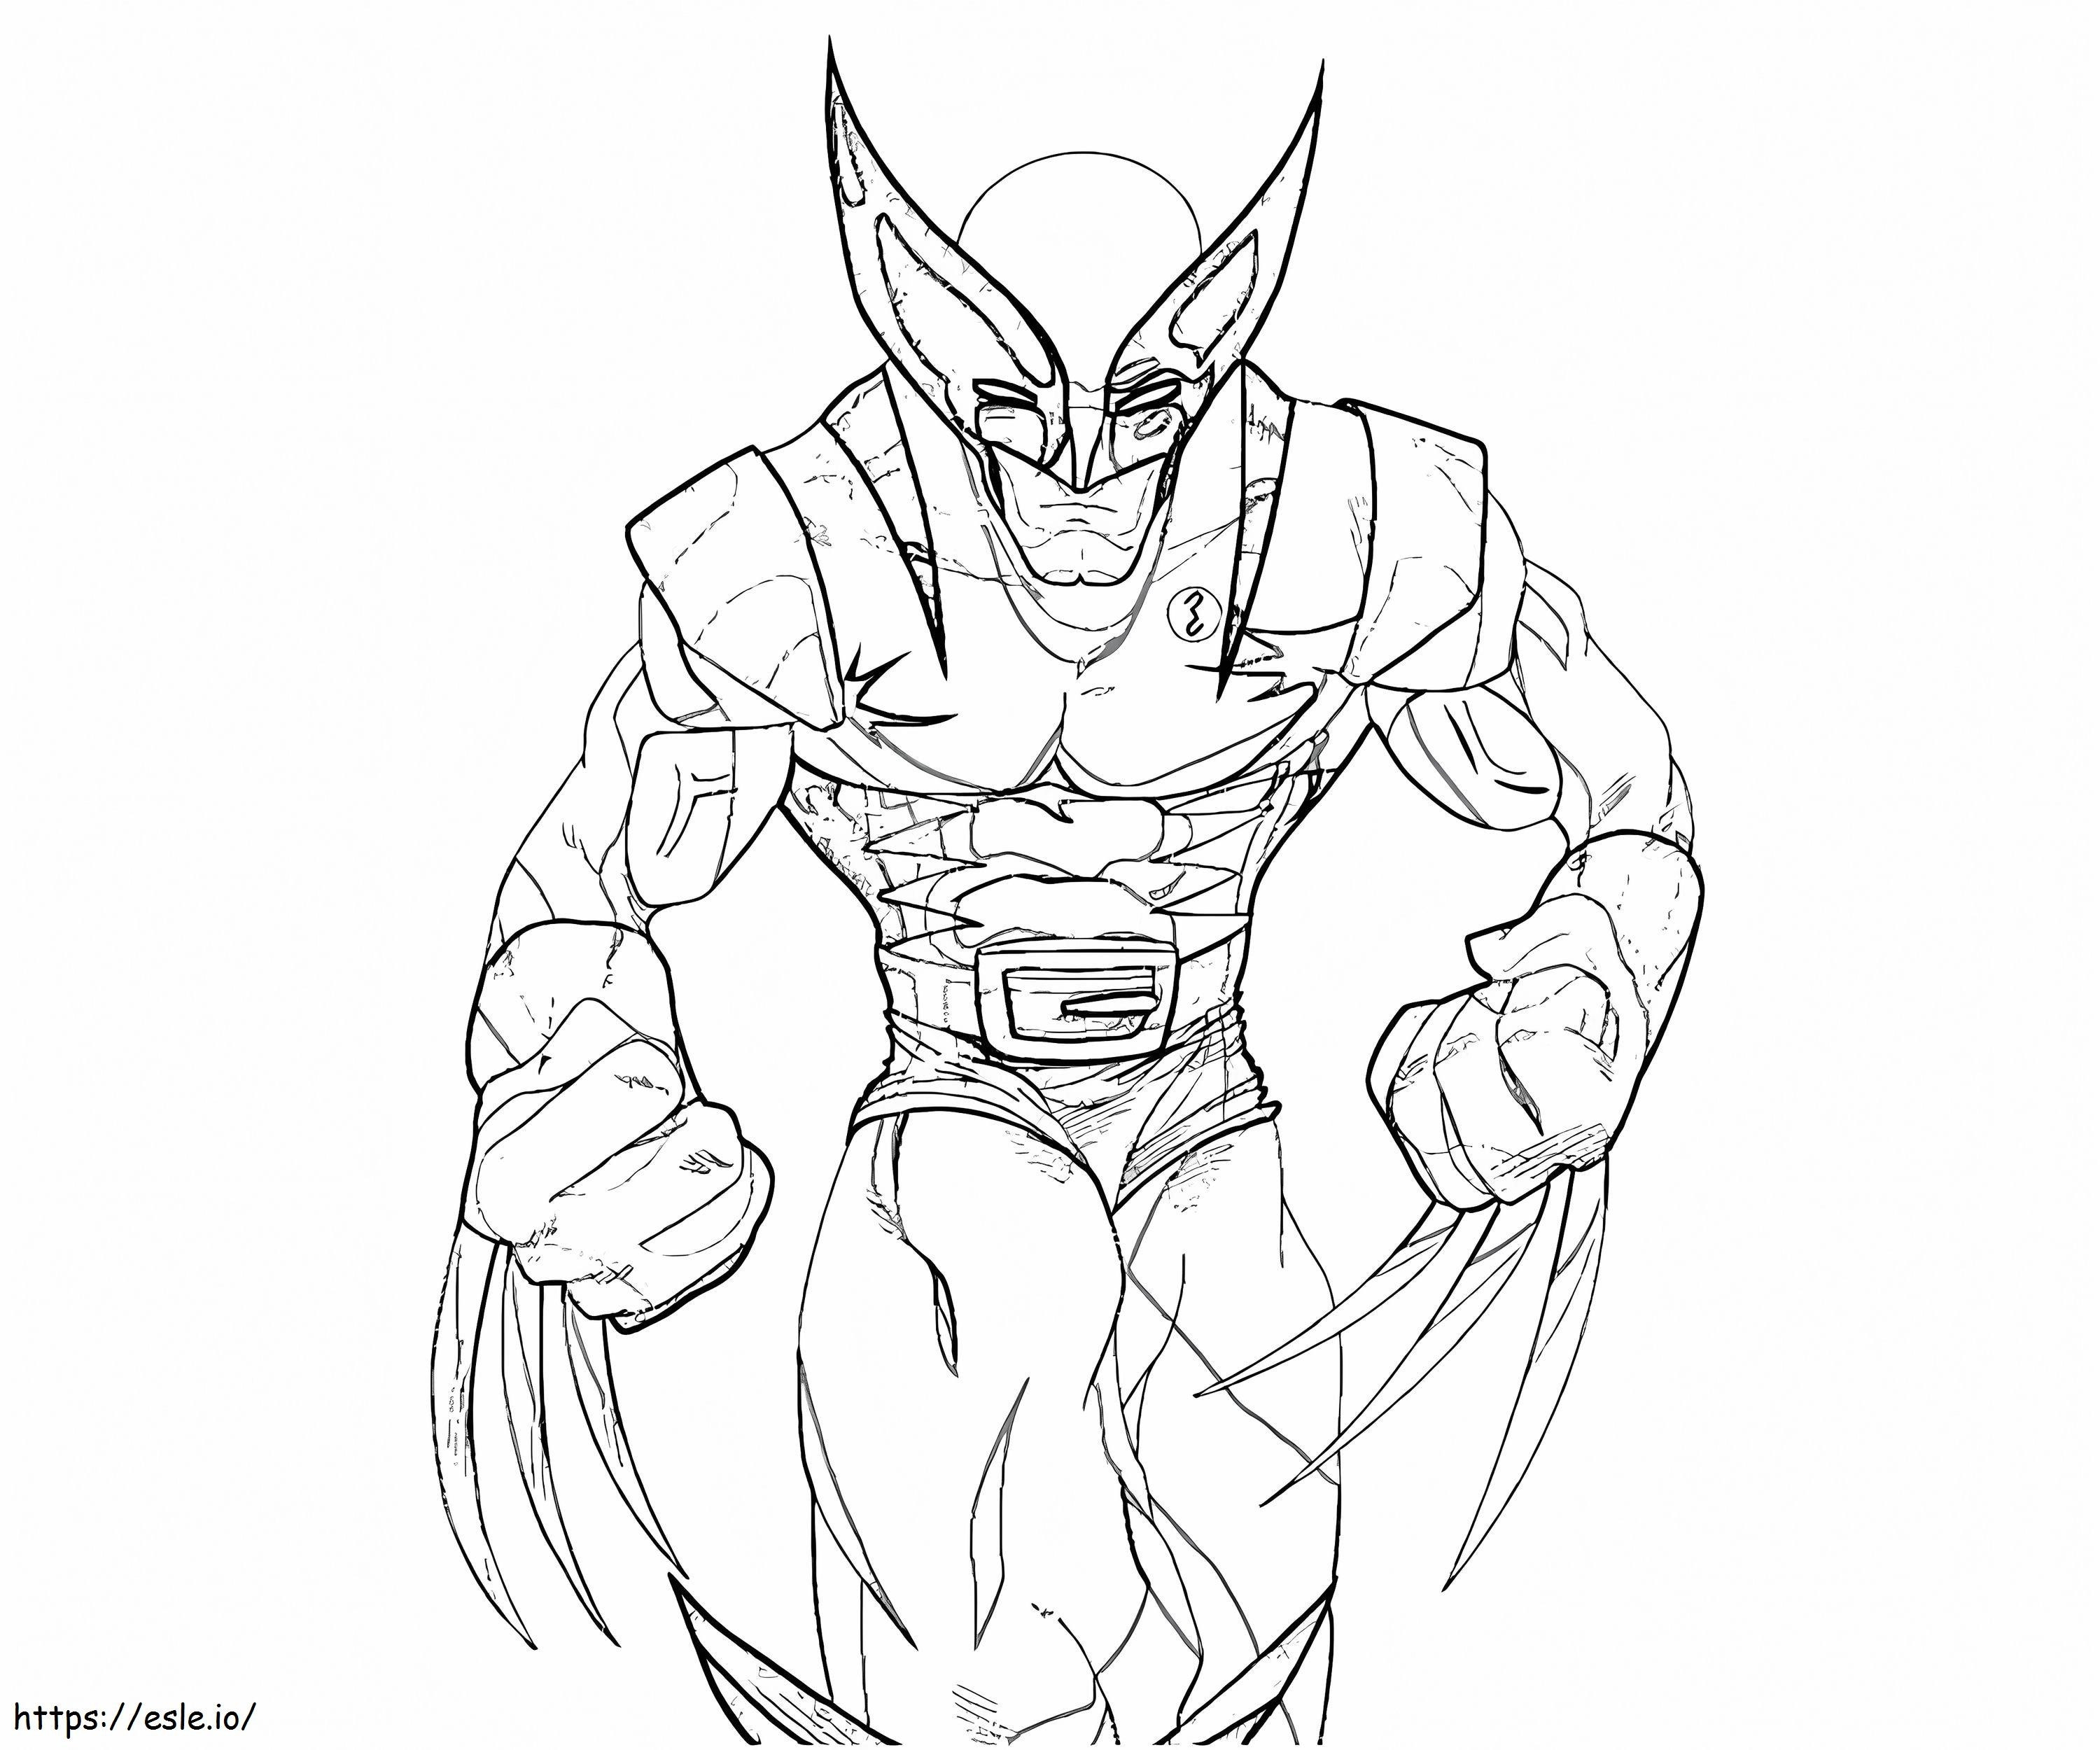 Amazing Wolverine coloring page